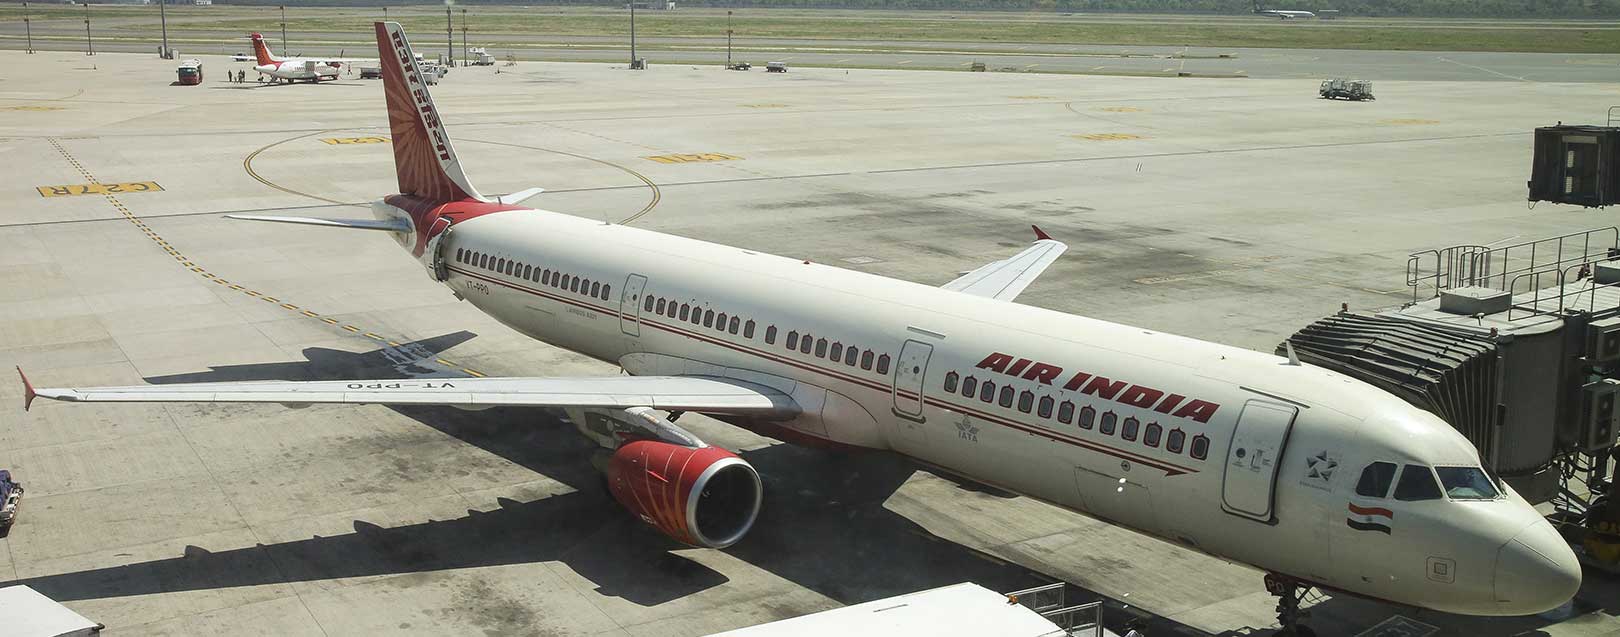 Air India may register Rs. 2,636 crore losses in FY16